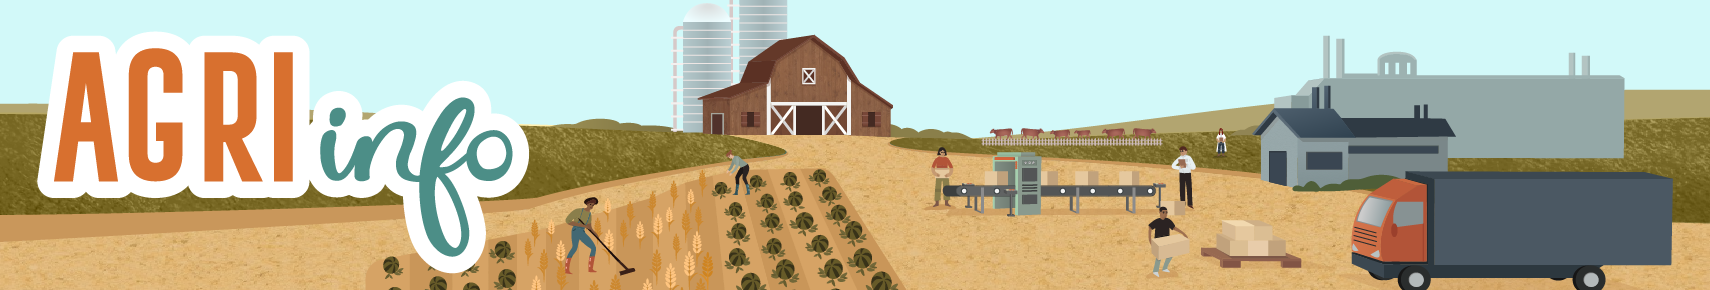 AGRIinfo text over a drawing of a farm with farm workers